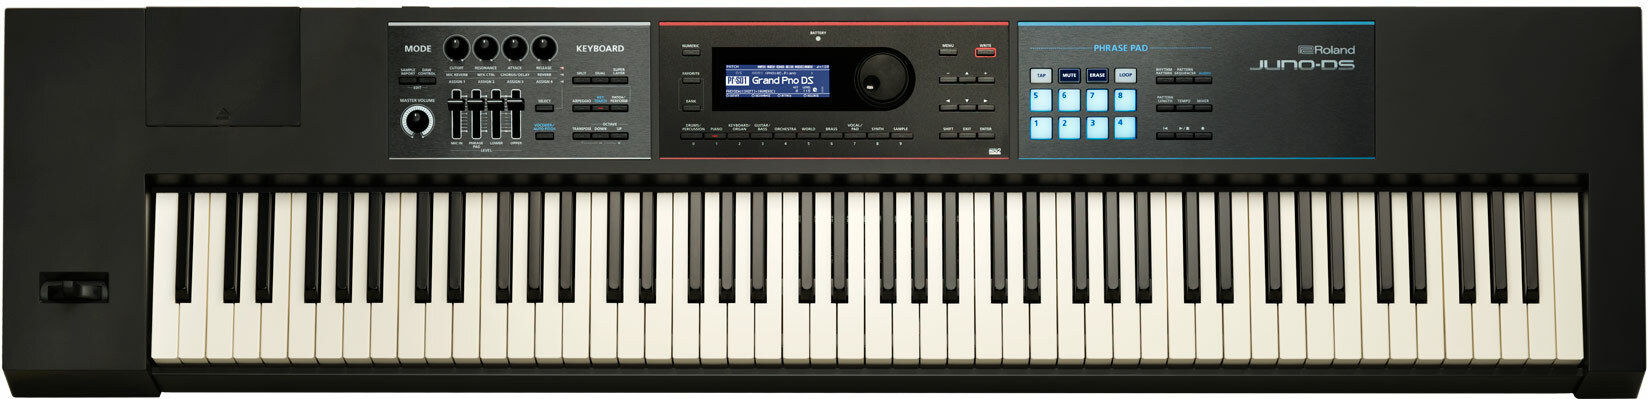 Roland Juno-ds 88 - Synthesizer - Main picture